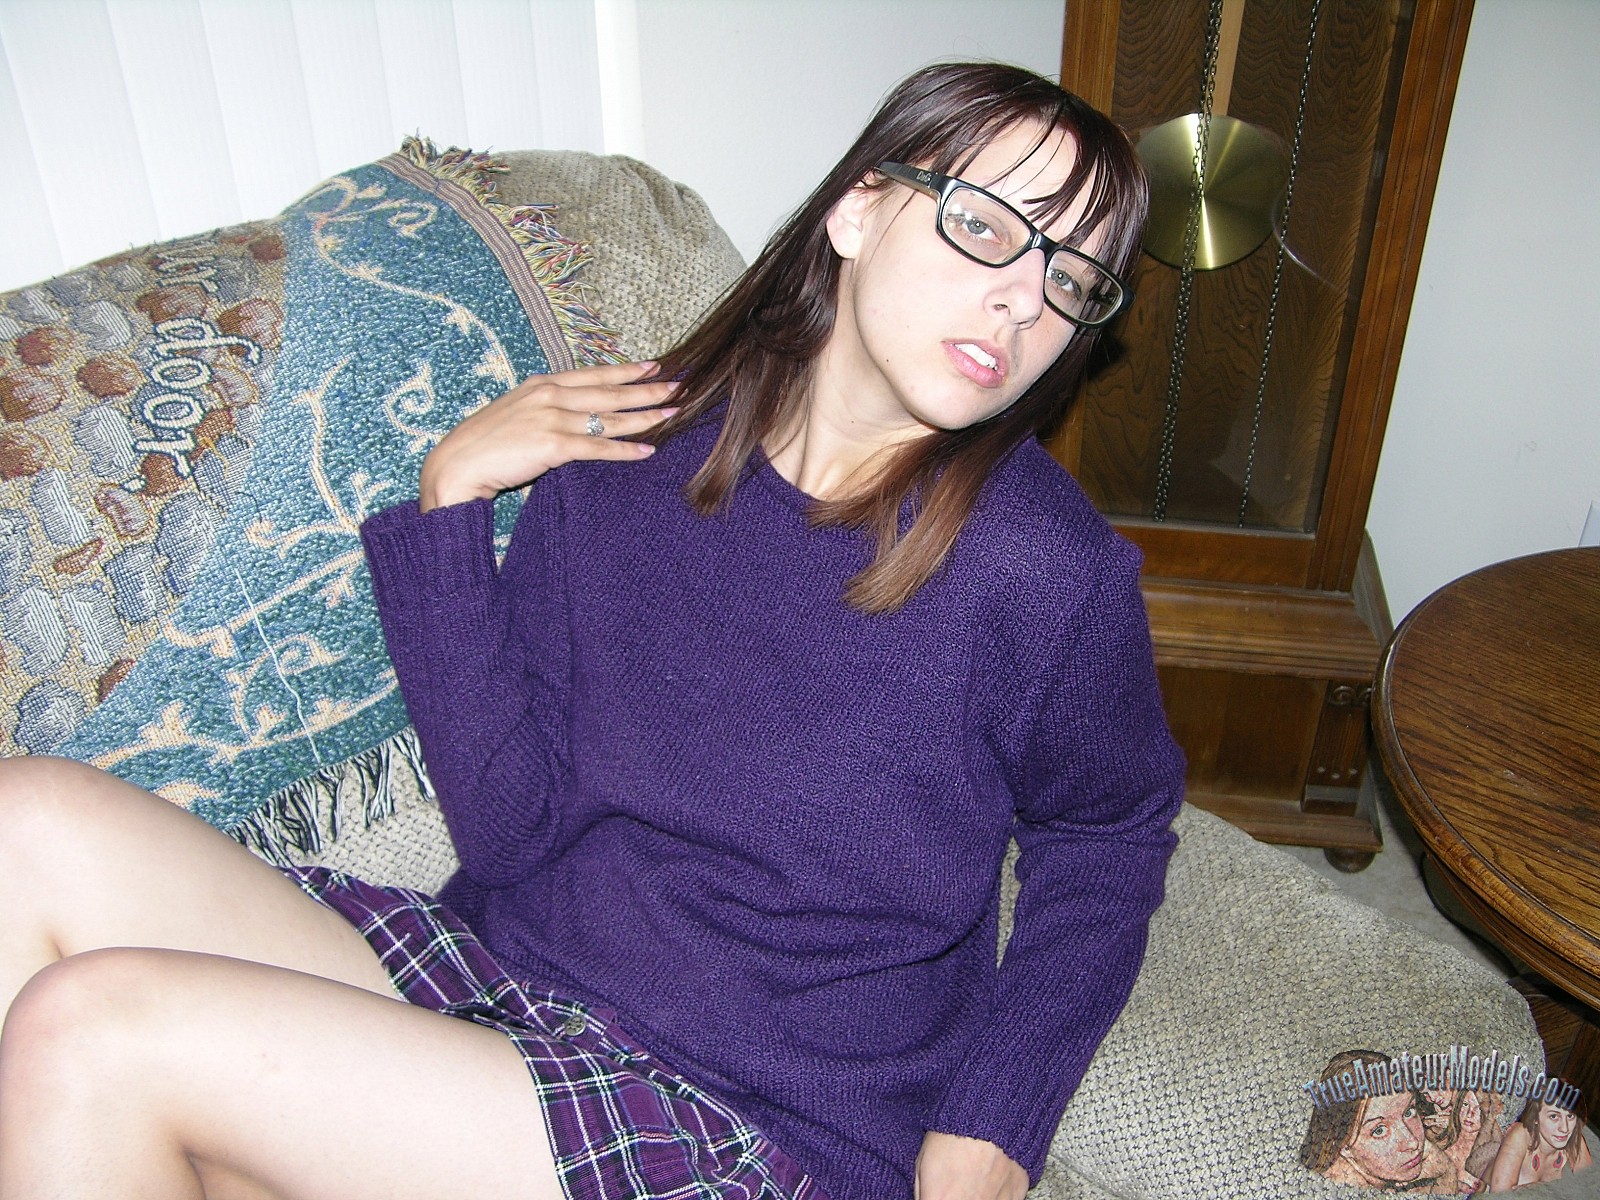 wpid-amateur-brunette-girl-in-glasses-bends-over-and-spreads-her-hairy-asshole2.jpg